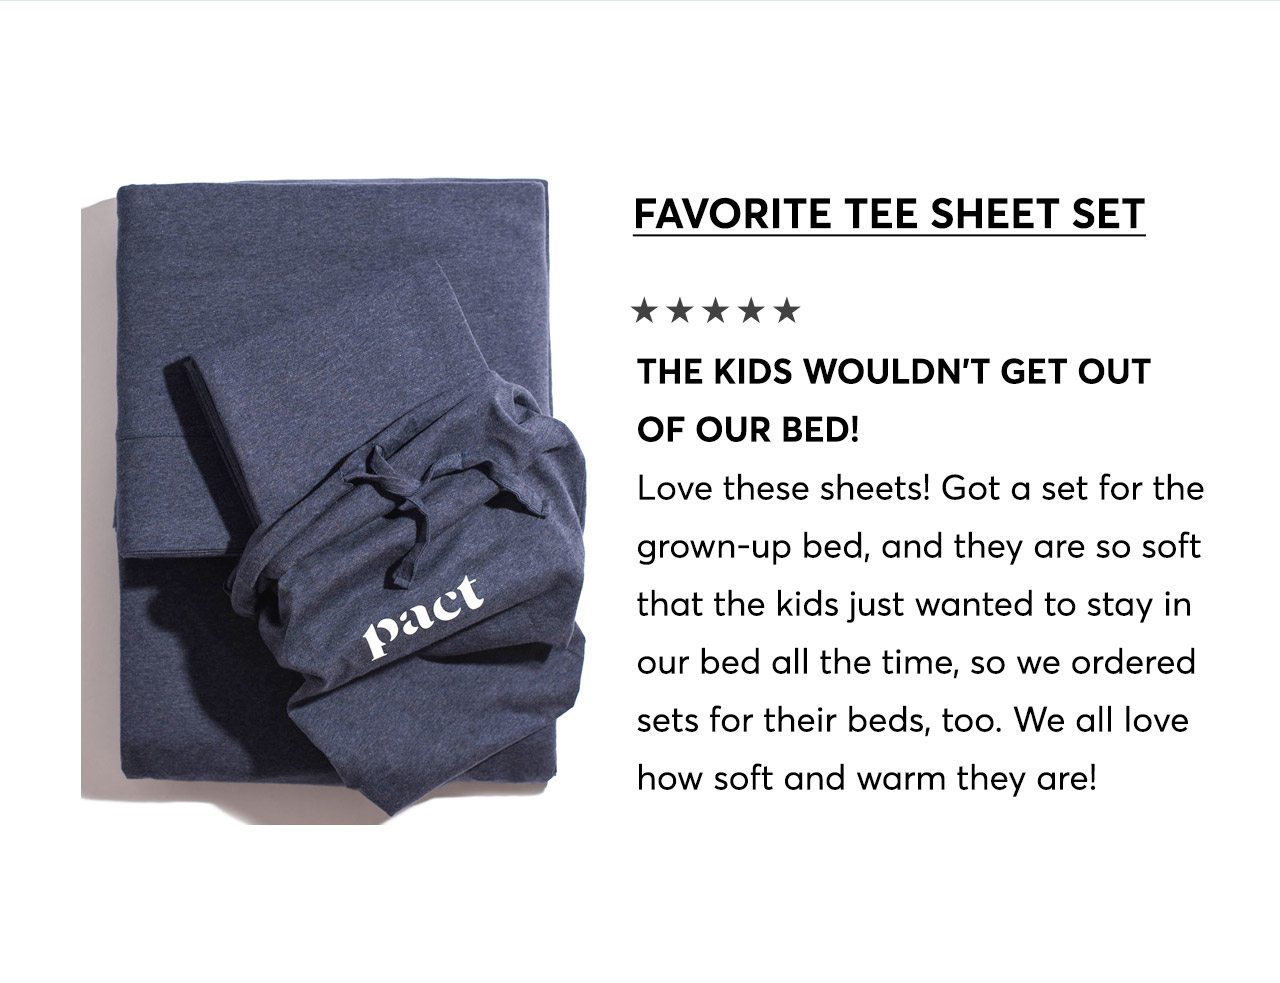 Favorite Tee Sheet Set, 5-star review: The kids wouldn't get out of our bed! Love these sheets! Got a set for the grown-up bed, and they are so soft that the kids just wanted to stay in our bed all the time, so we ordered sets for their beds, too. We all love how soft and warm they are! 